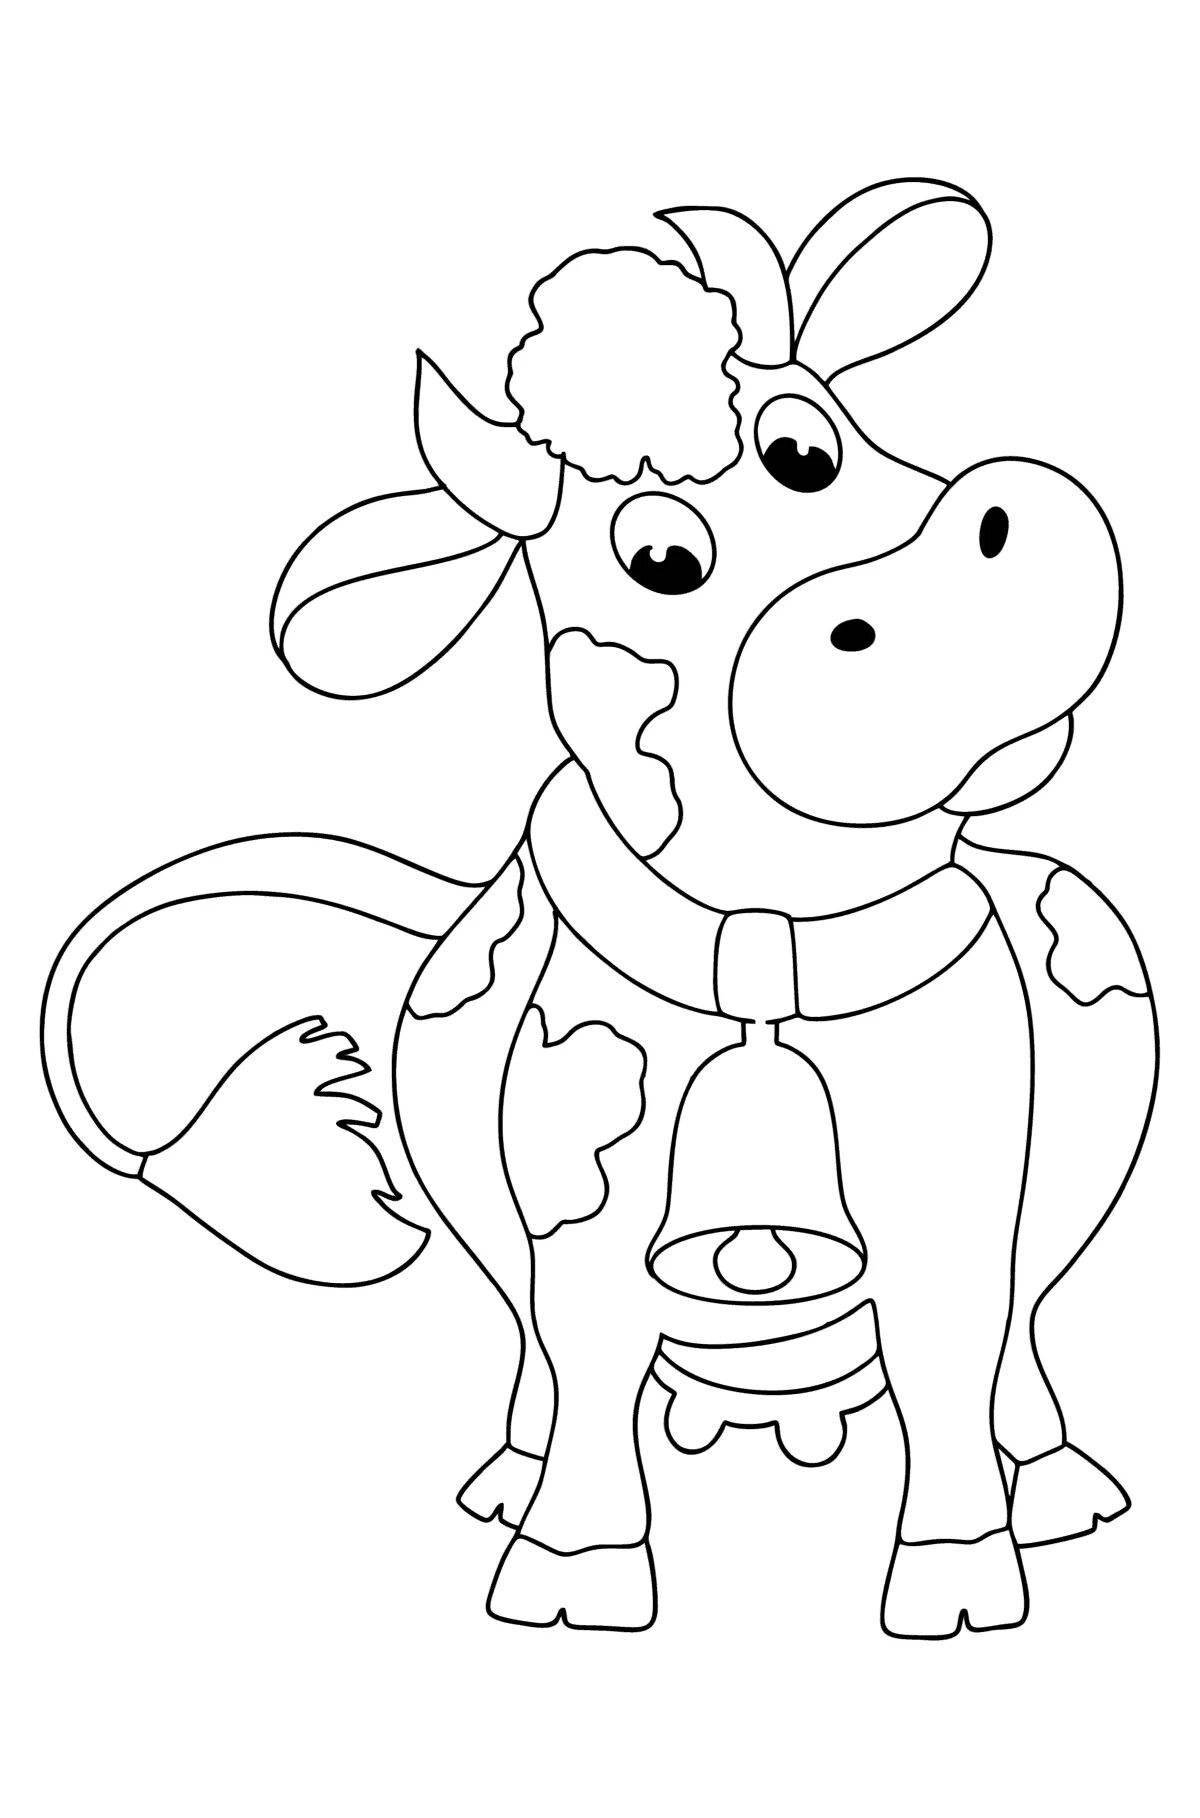 Fabulous cow coloring book for children 4-5 years old